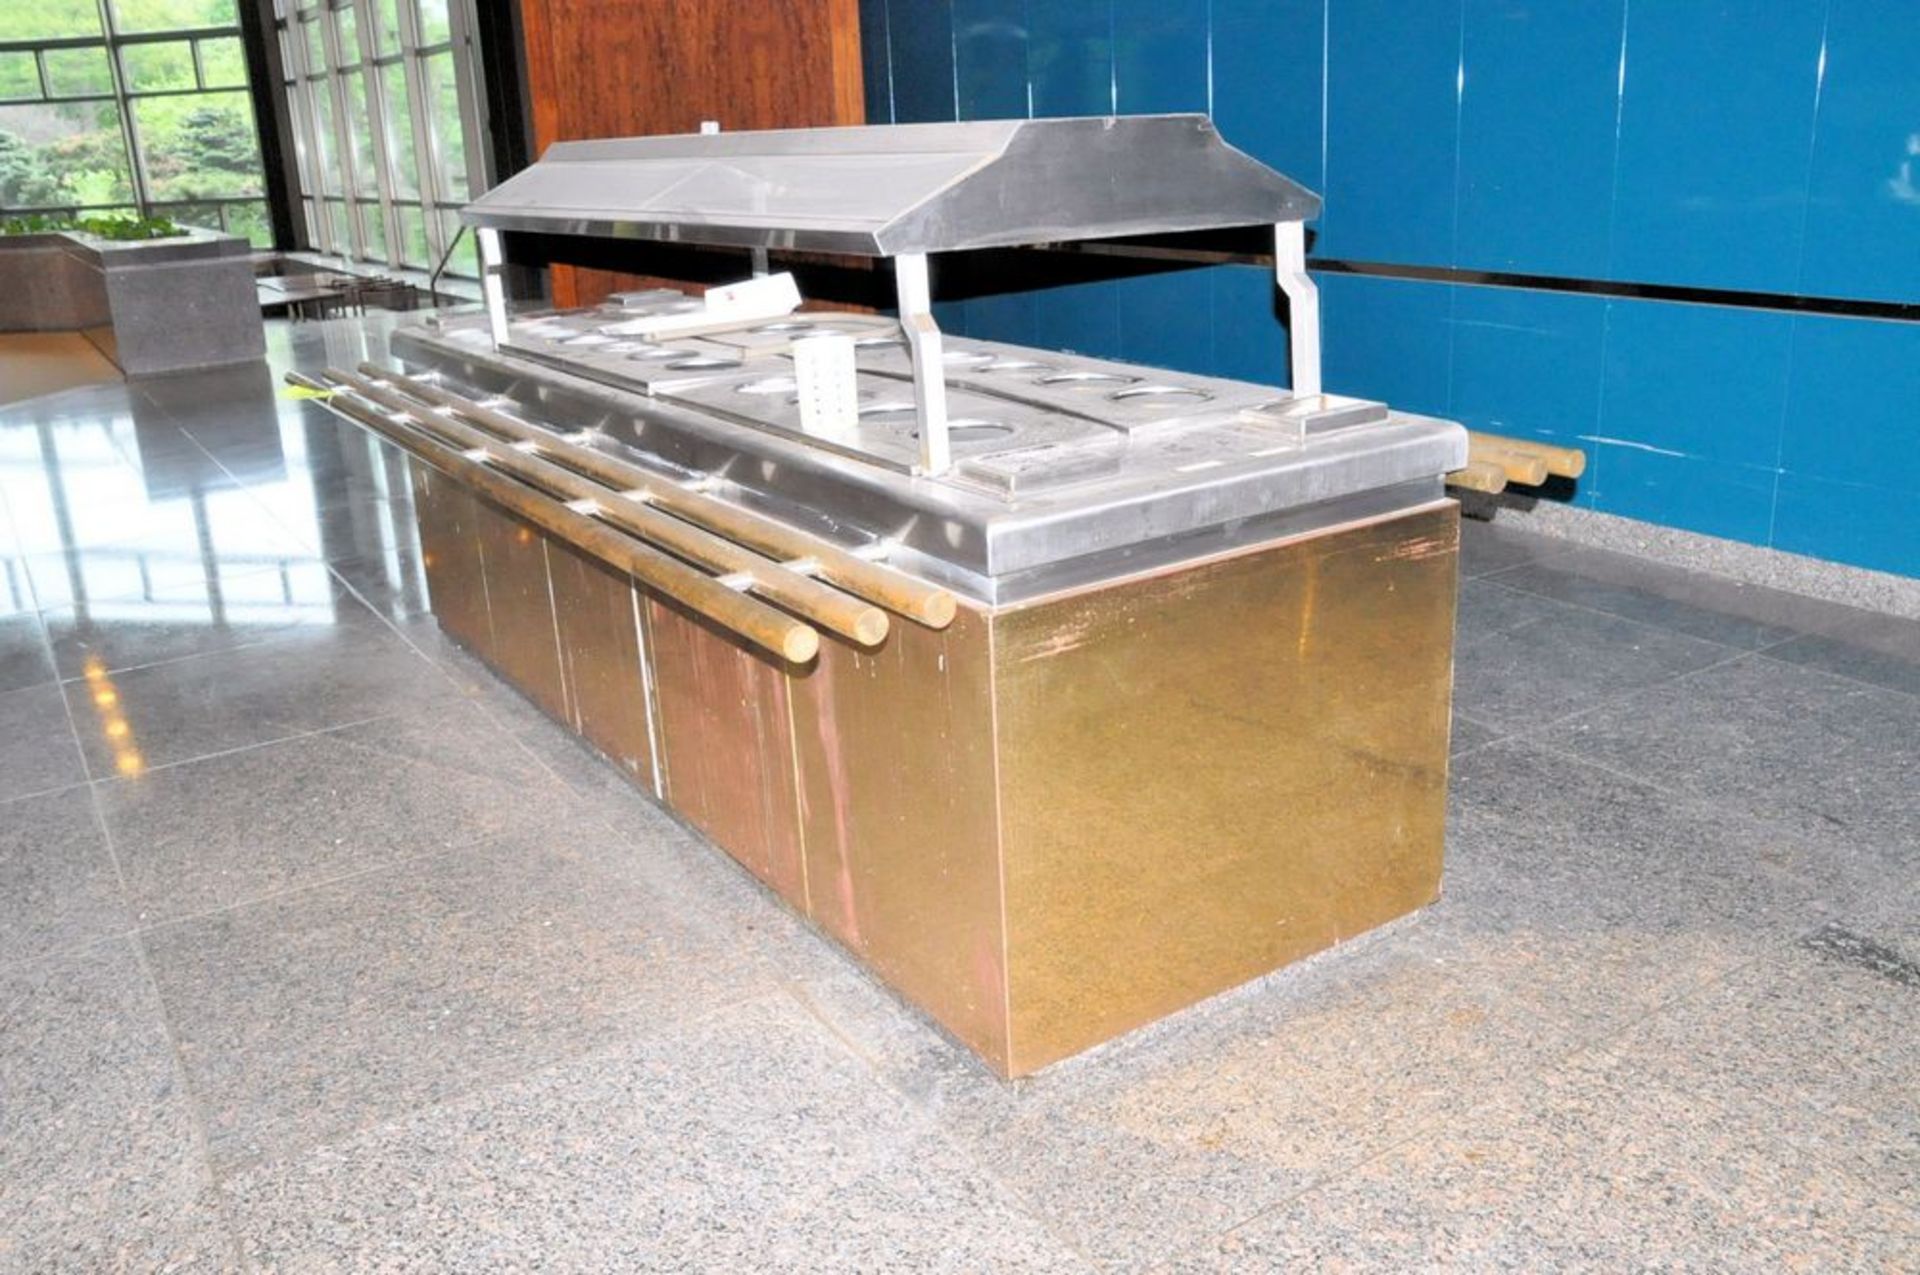 Refrigerated Stainless Steel Salad Bar, 3' x 10', 16-Food Compartments, 16-Silverware Holders, - Image 2 of 2